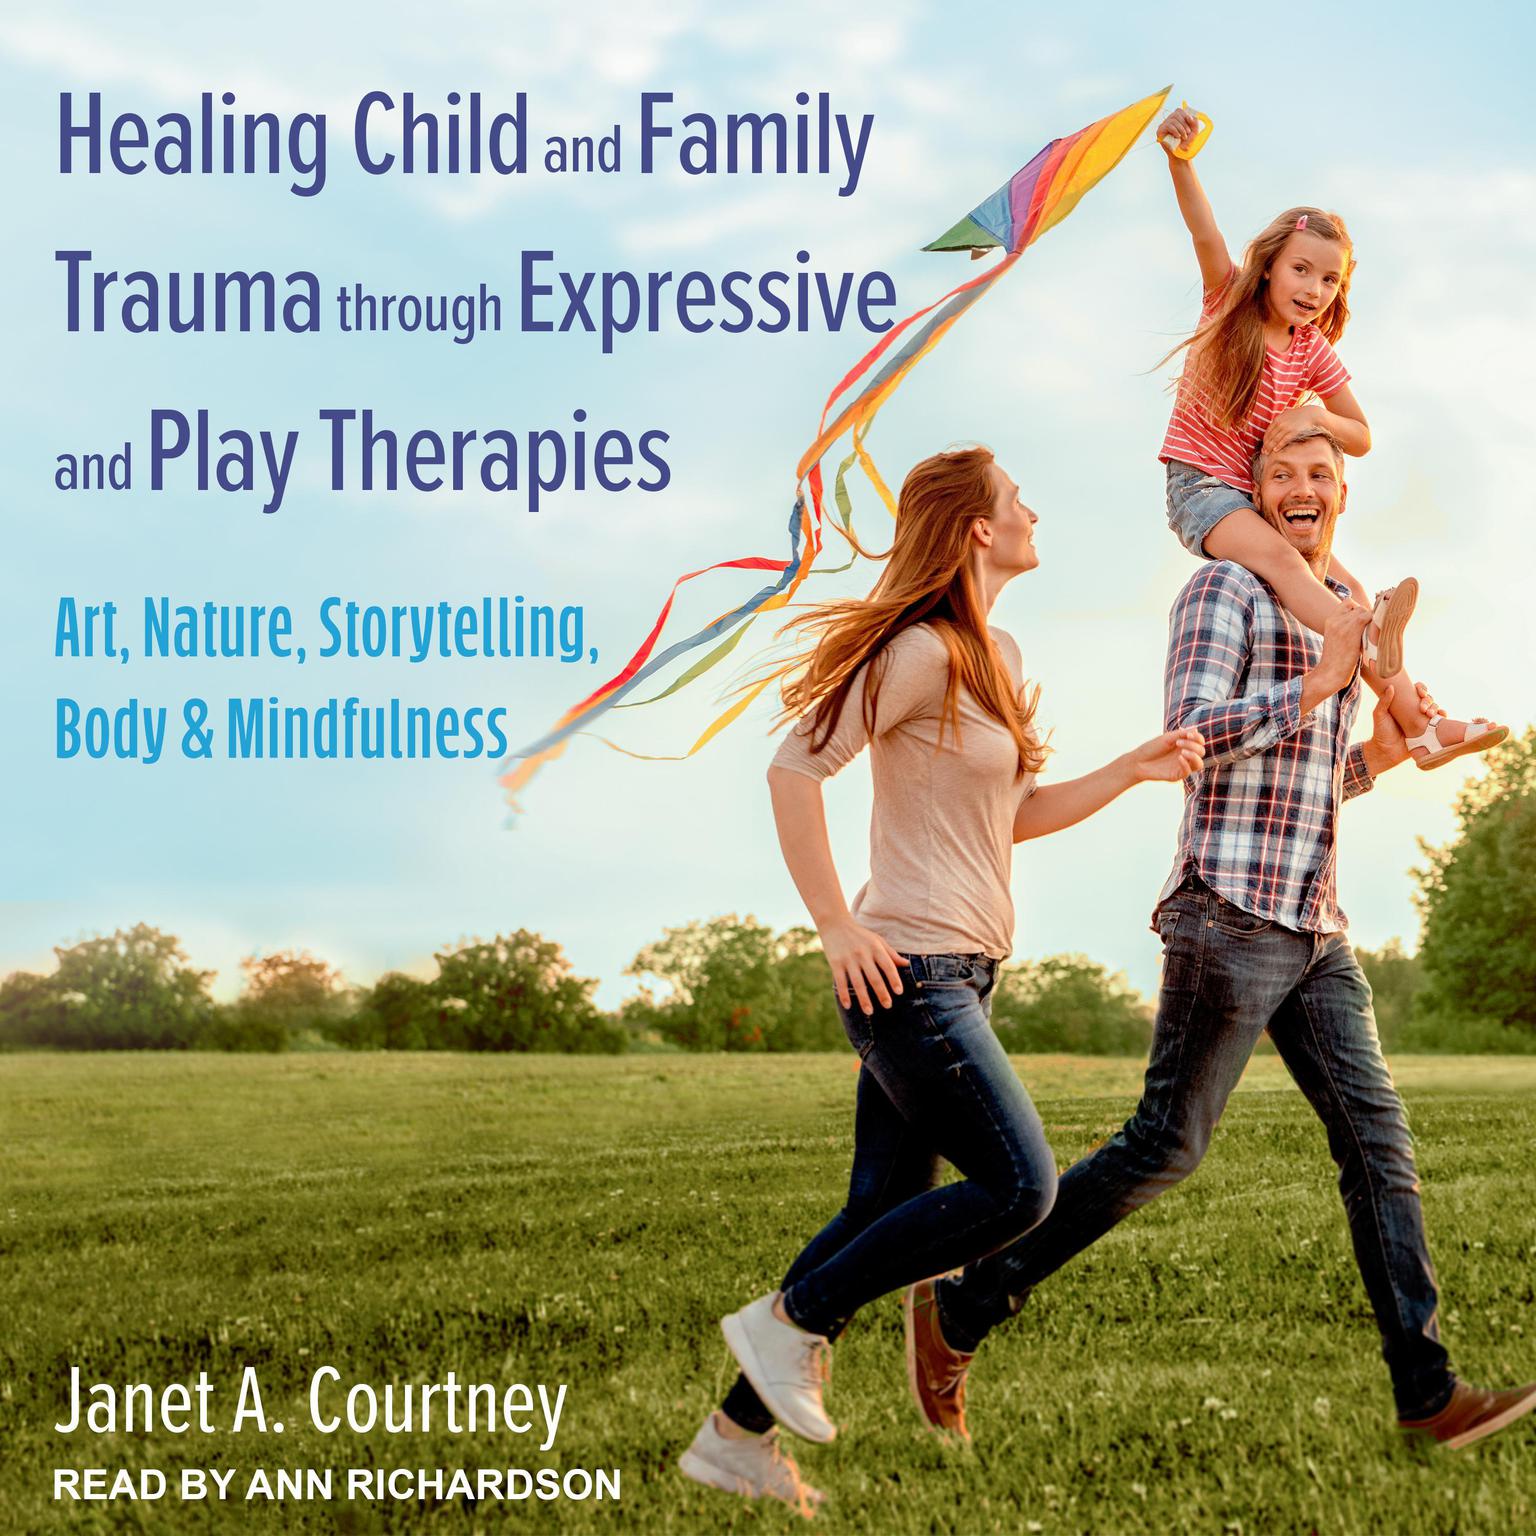 Healing Child and Family Trauma through Expressive and Play Therapies: Art, Nature, Storytelling, Body & Mindfulness Audiobook, by Janet A. Courtney